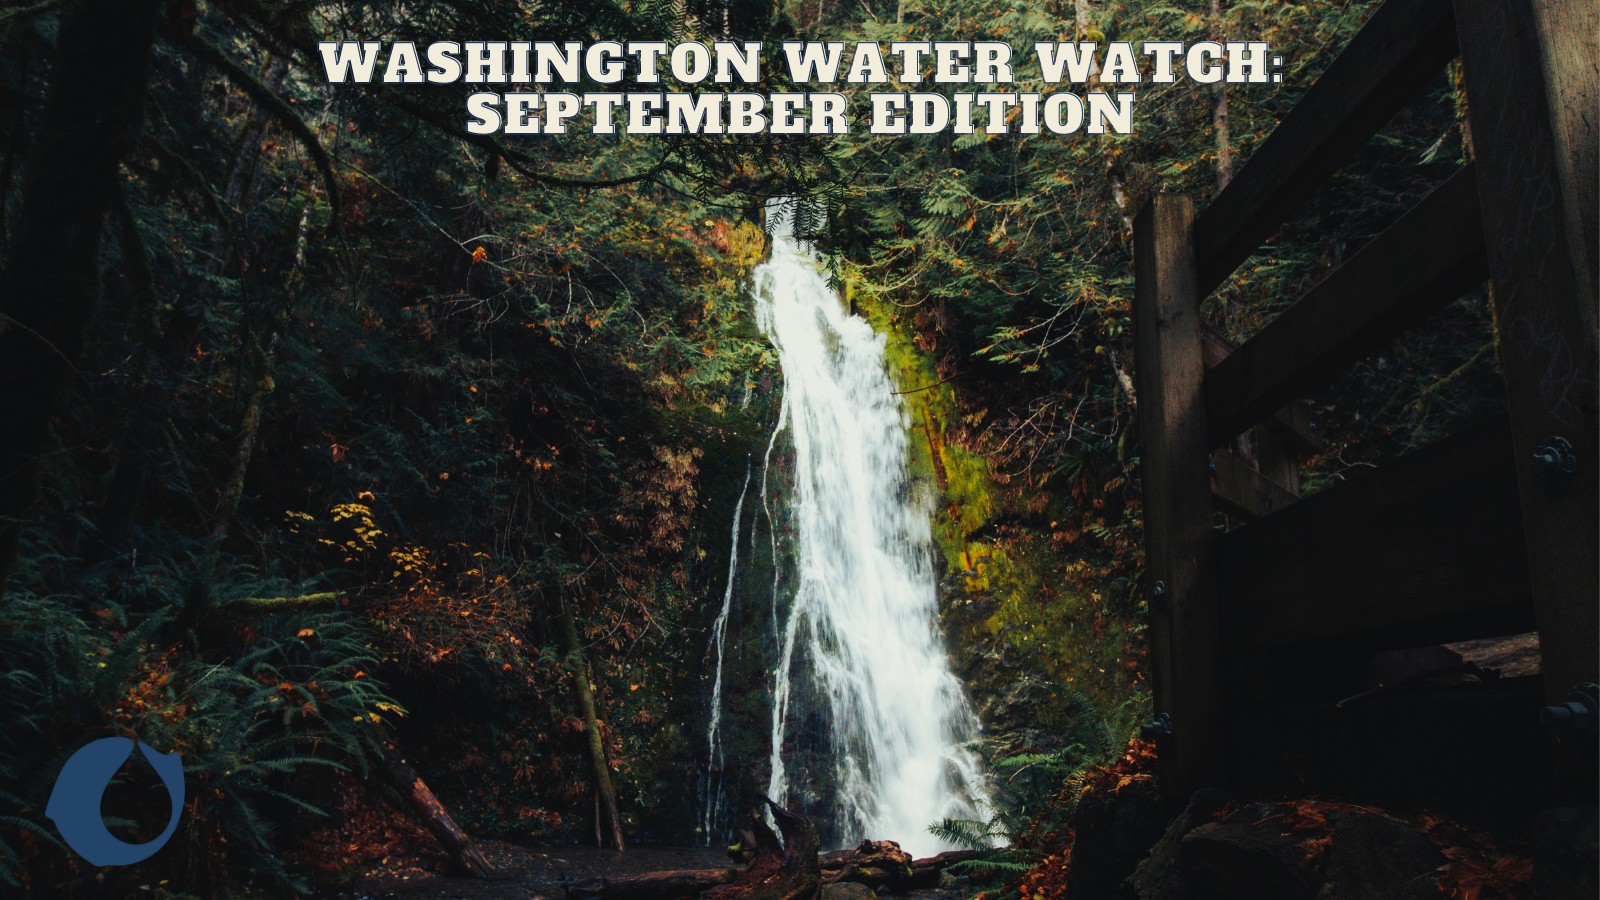 Image of Madison Falls with overlaying text that reads "Washington Water Watch: September Edition"